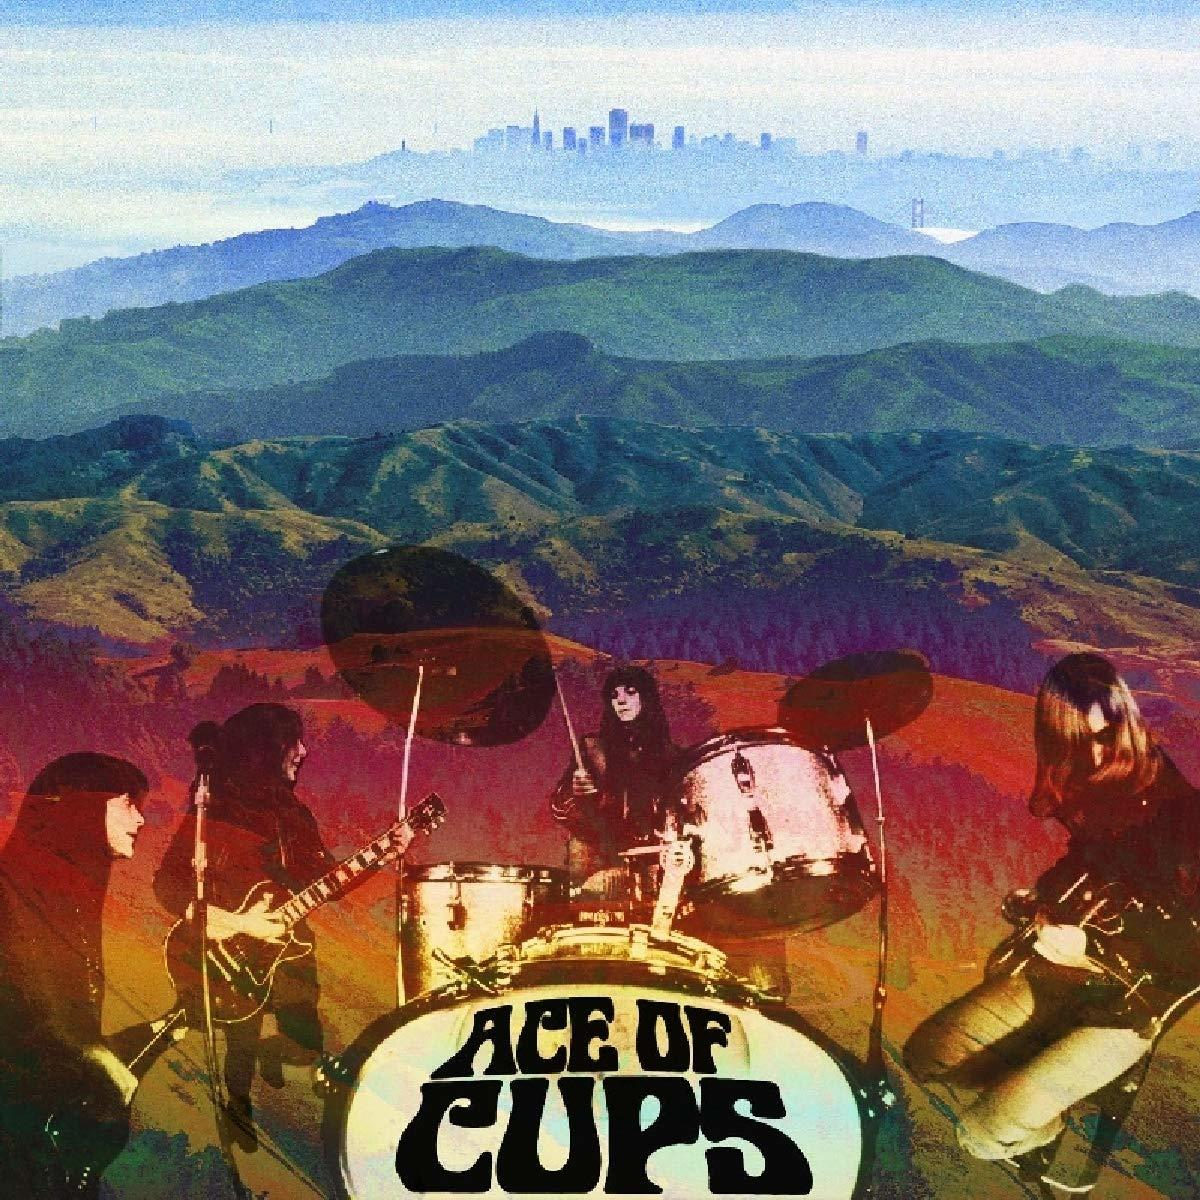 Ace Of Cups - Cups (Vinyl) - Of Ace